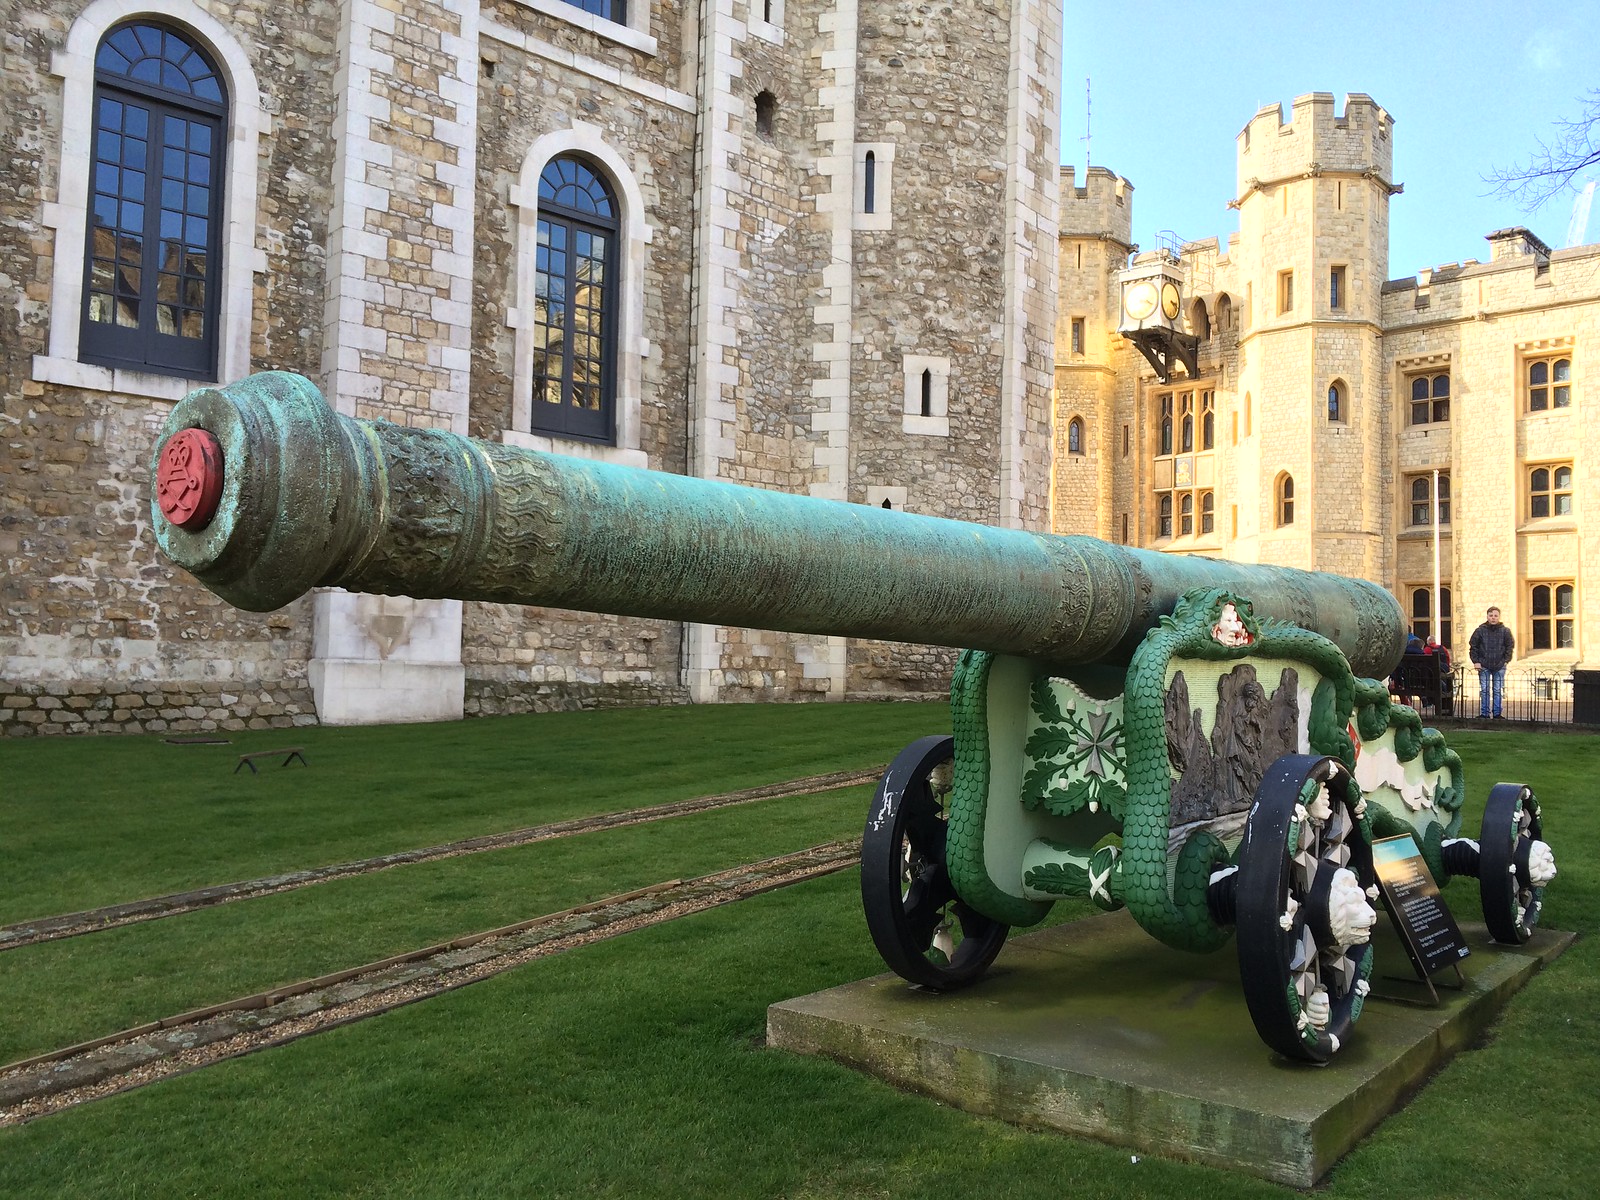 17th century Maltese cannon in Tower of London